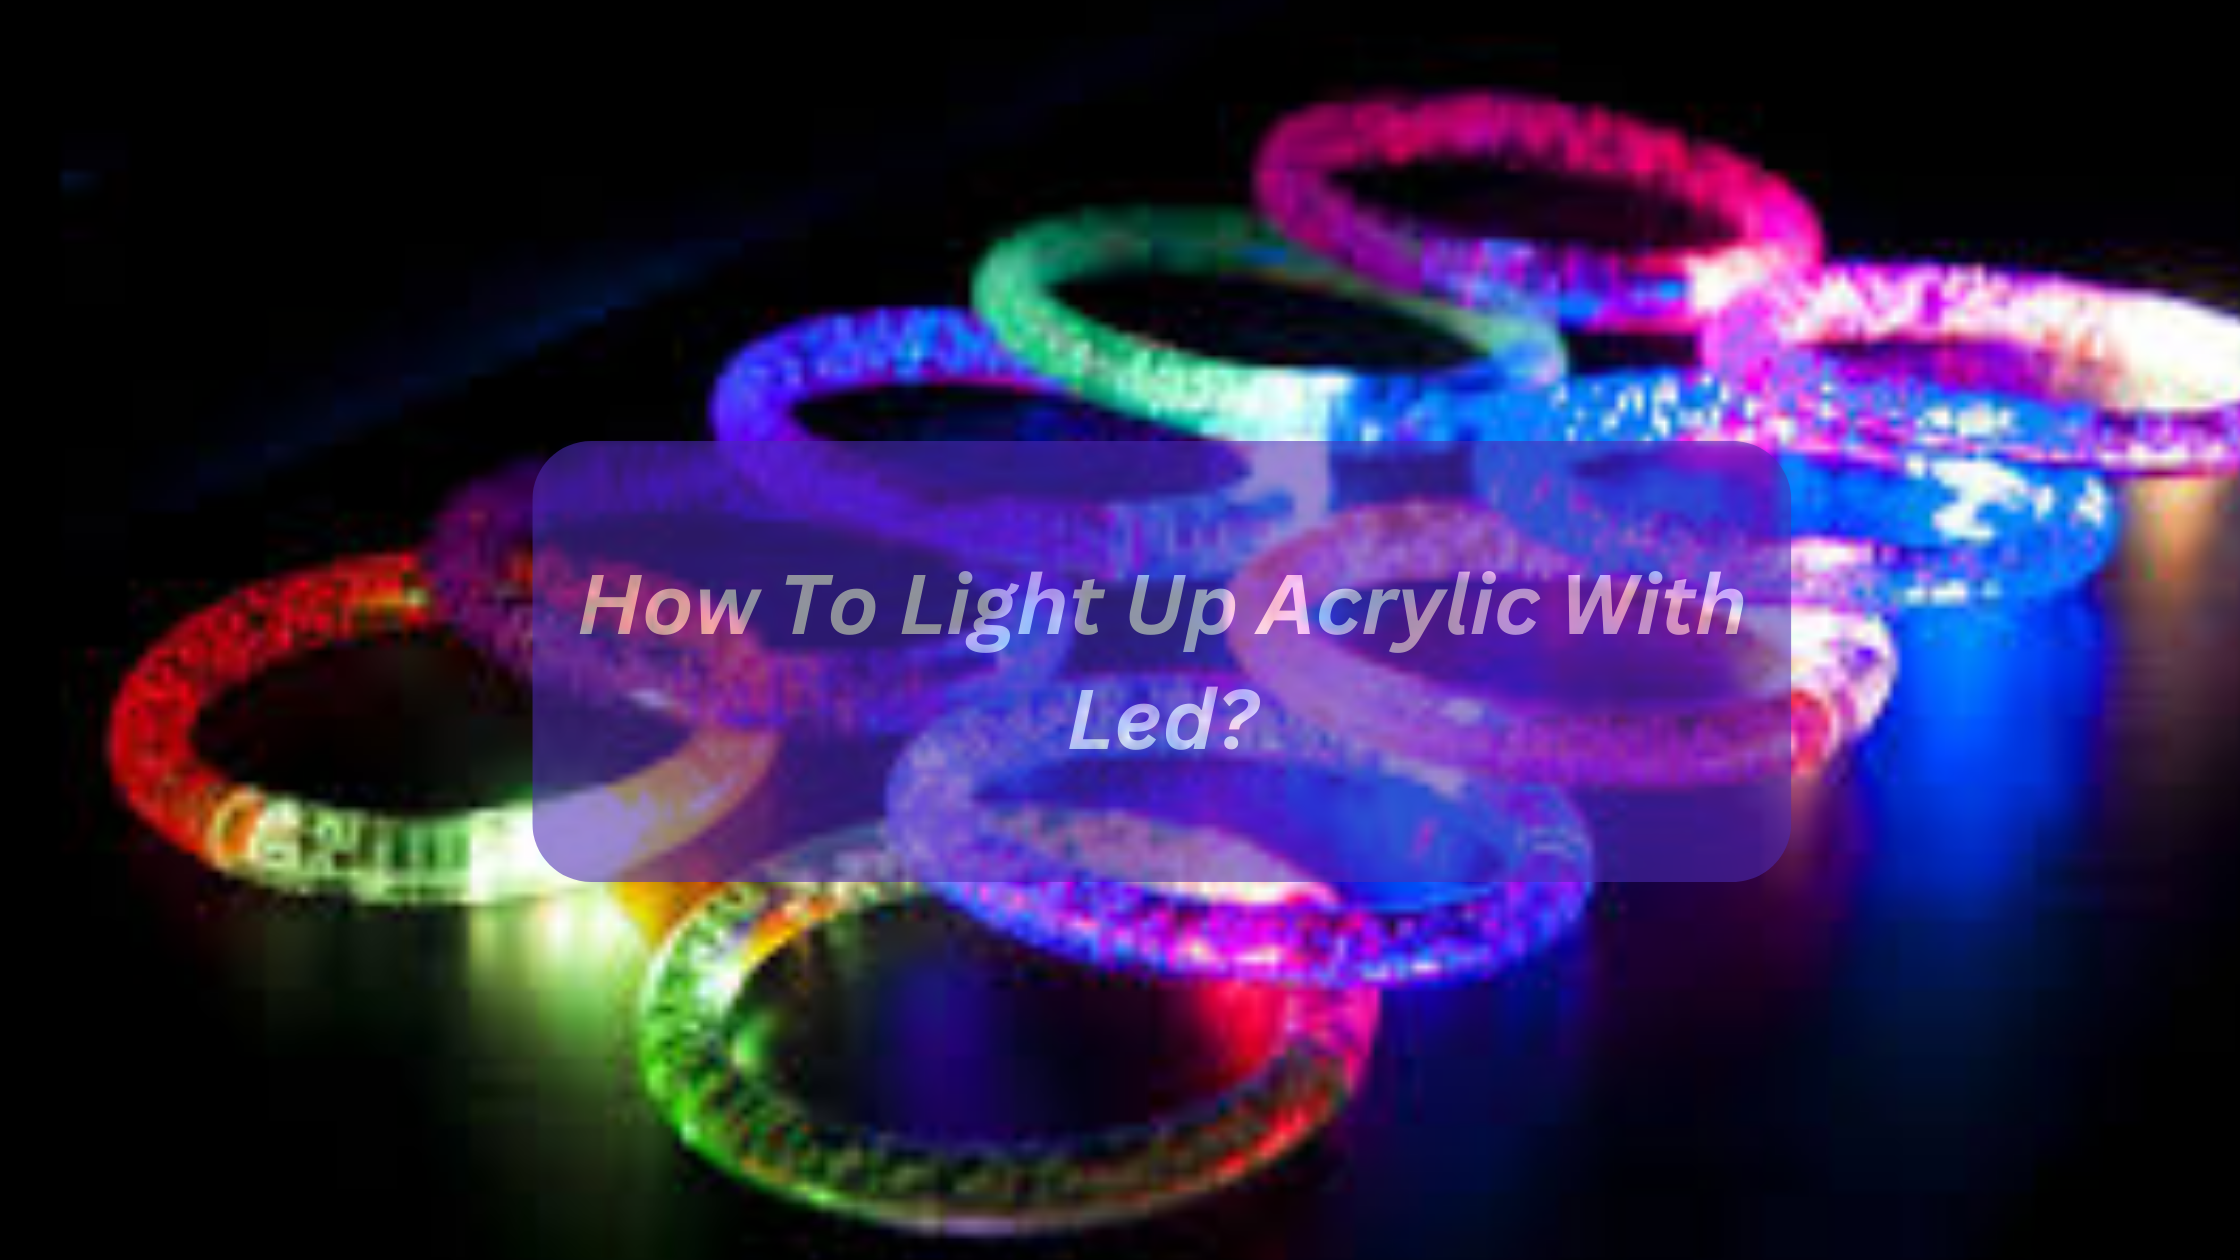 How To Light Up Acrylic With Led?